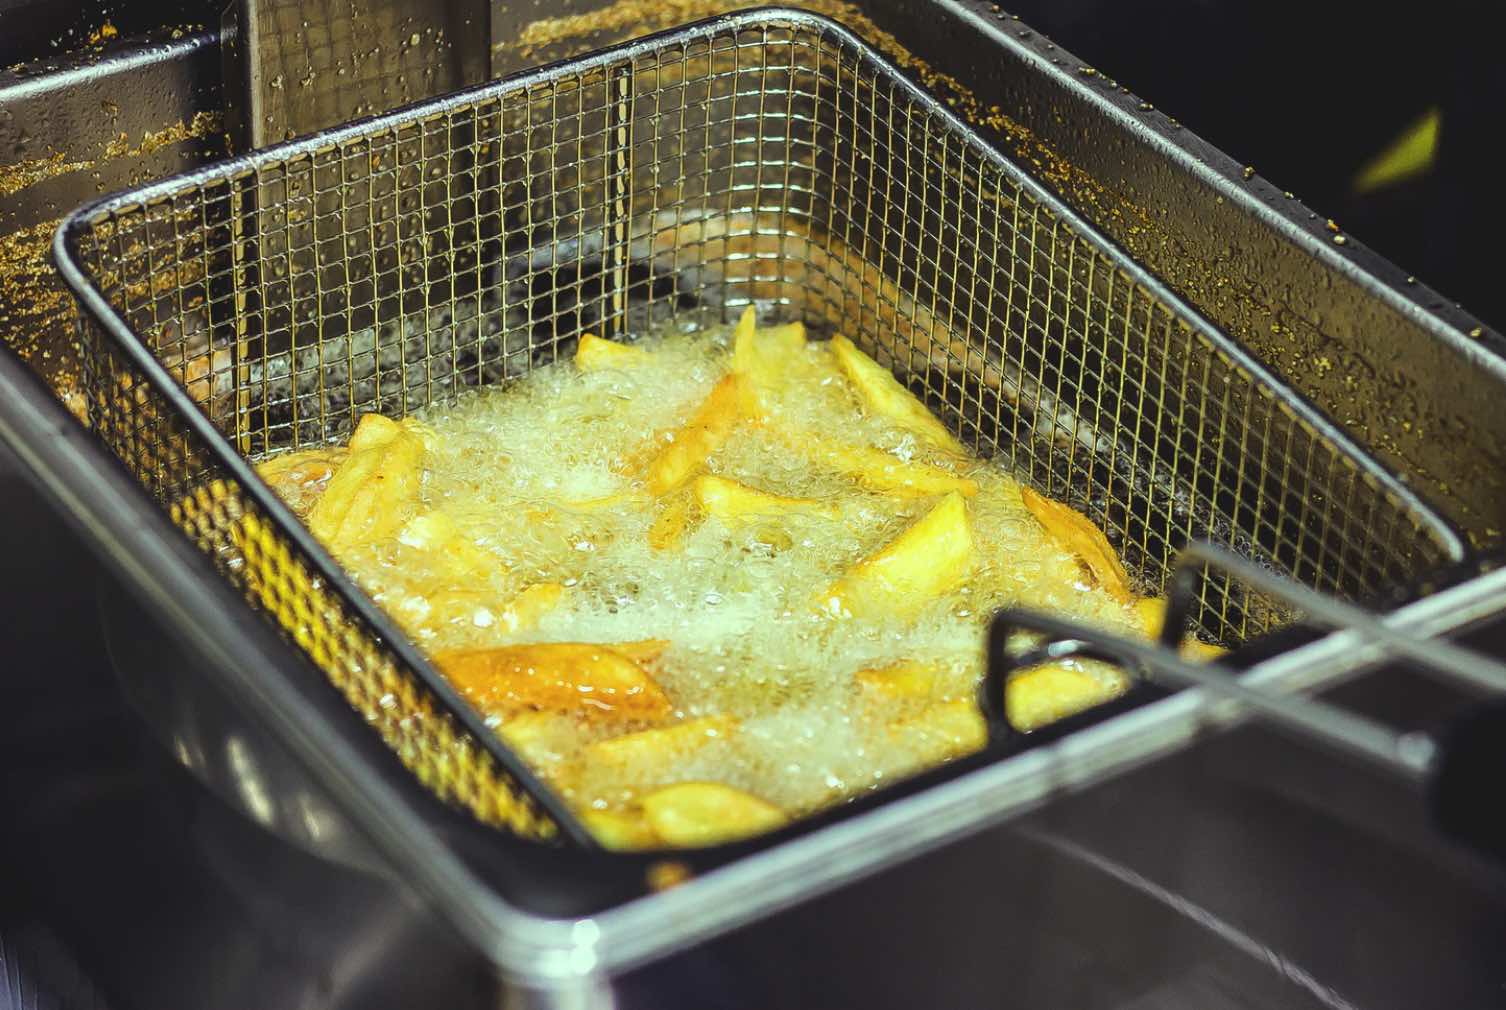 The Dos and Don'ts of a Professional Deep Fryer - Pro Restaurant Equipment